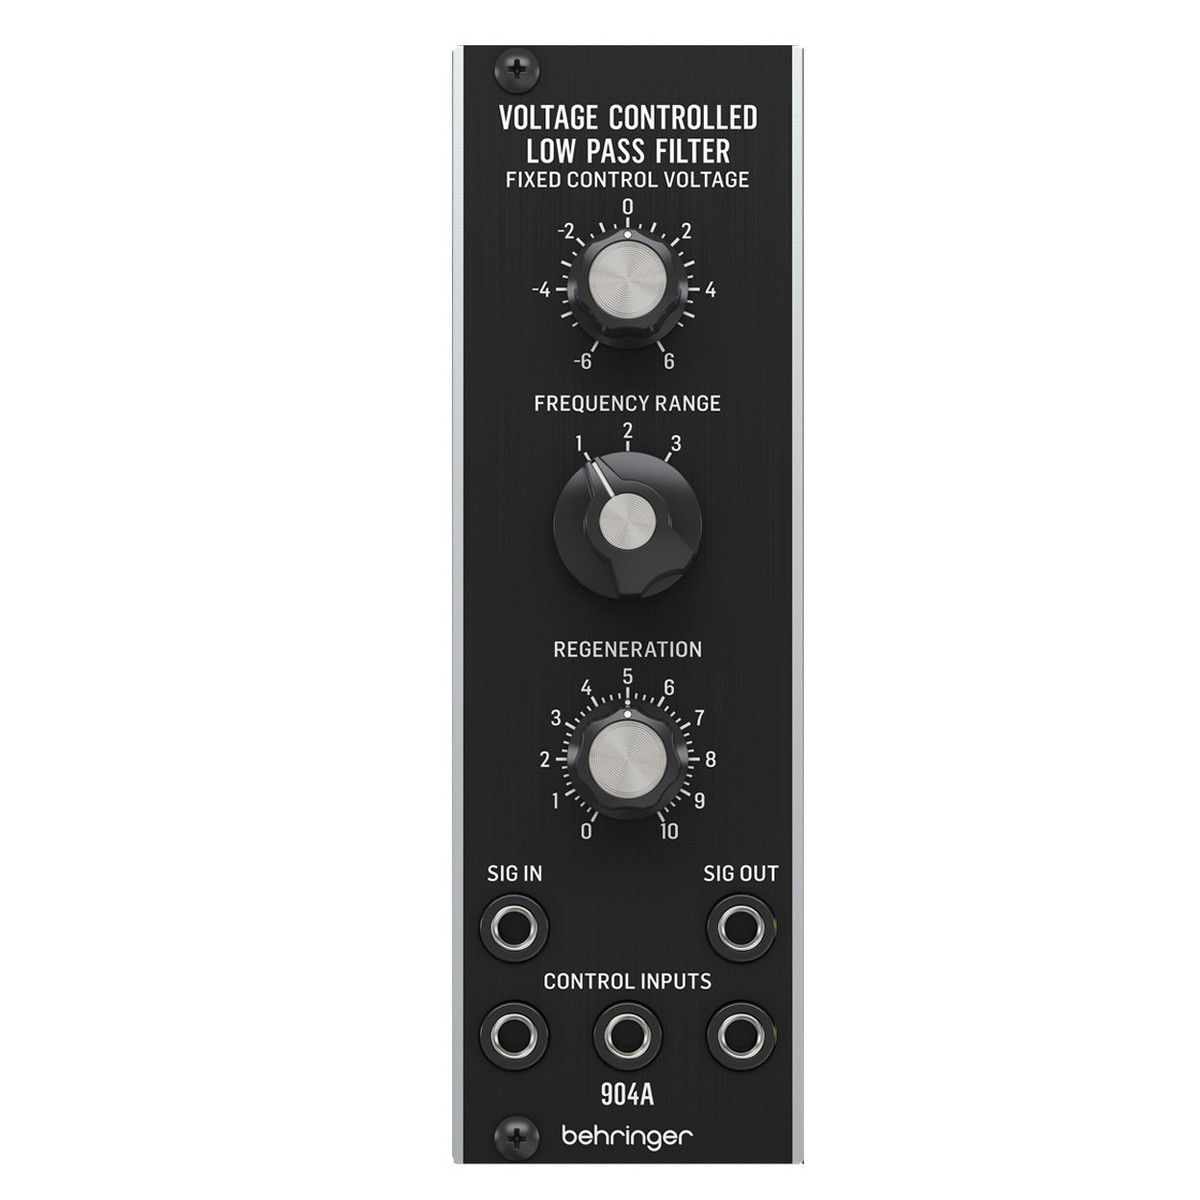 BEHRINGER 904A VCF LOW PASS FILTER MODULO ANALOGICO LOW PASS FILTER PER EURORACK 2